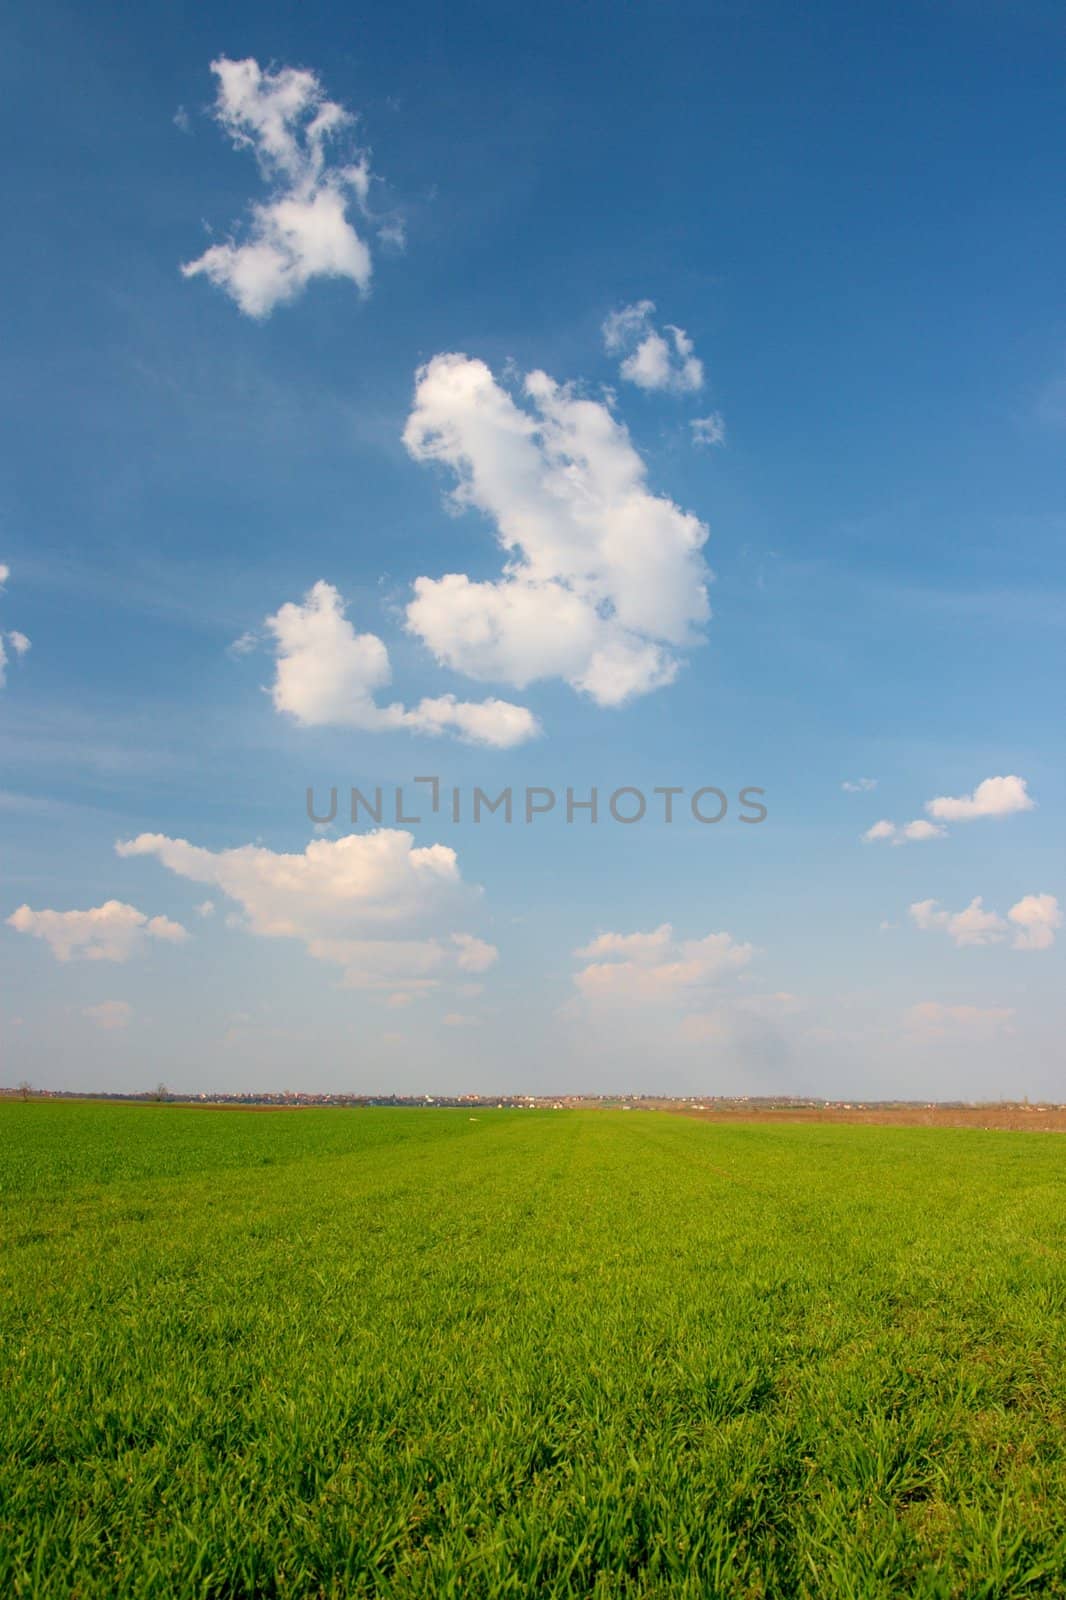 Green agricultural field, blue sky, white clouds